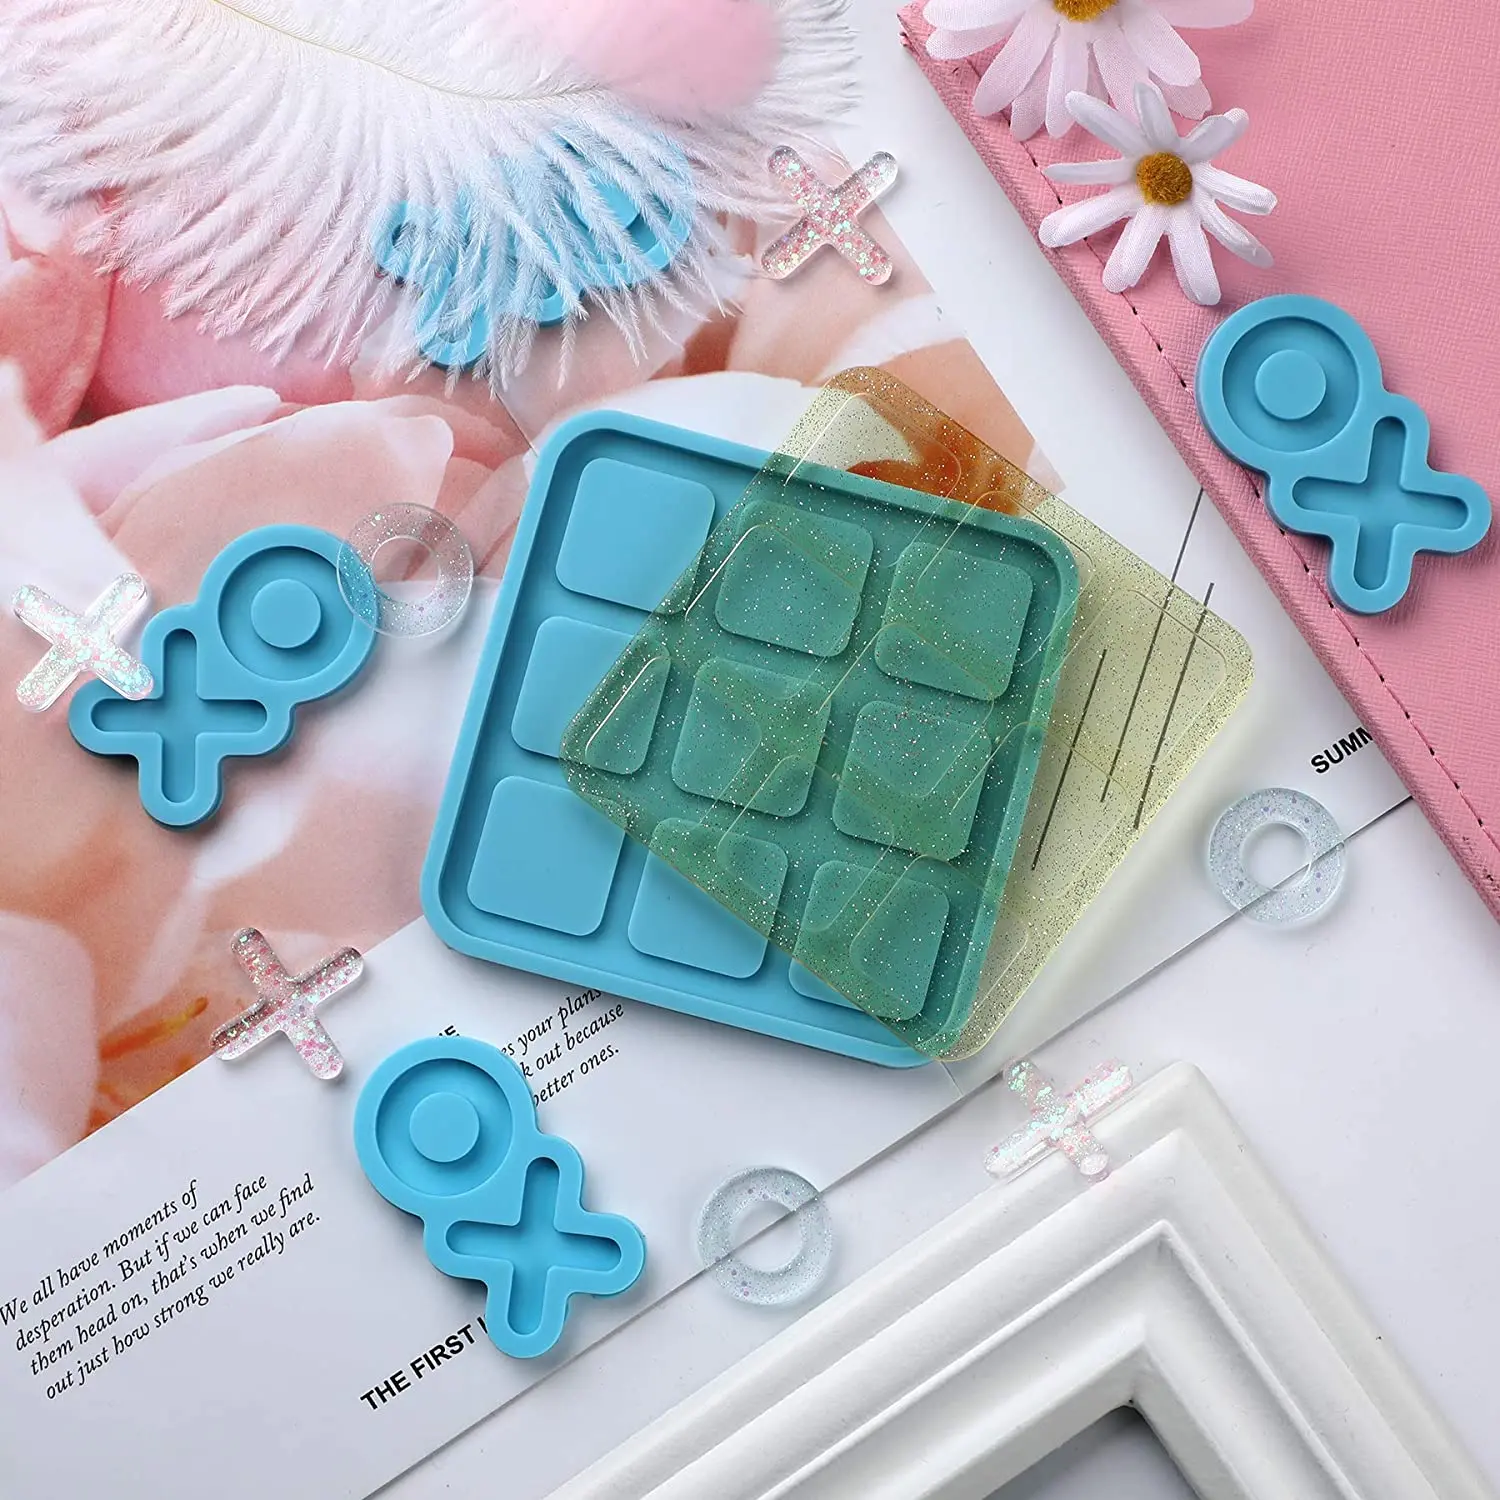 

Tic Tac Toe Resin Mold with 4 Chess Pieces Molds X O Board Game Silicone Molds for Resin Casting DIY Tabletop Board Game, White